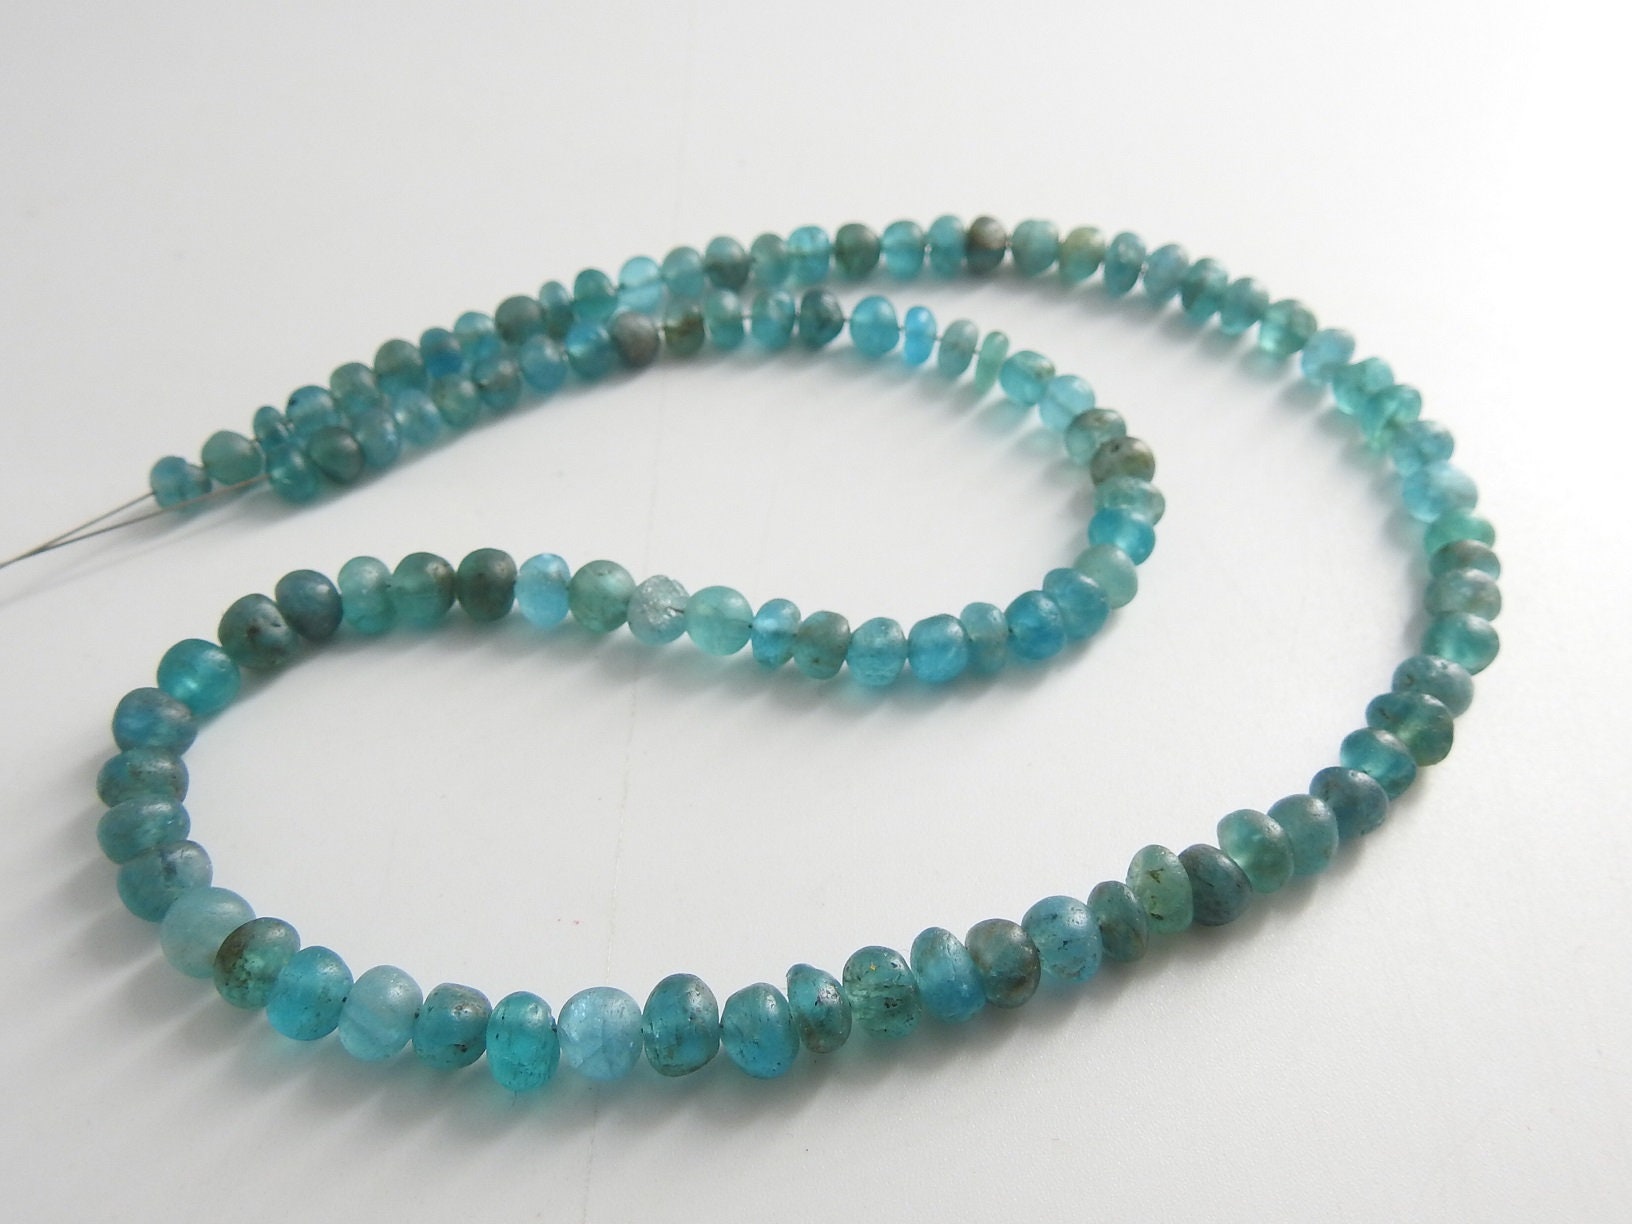 Sky Blue Apatite Roundel Bead,Smooth,Handmade,Matte Polished,Loose Bead,Necklace,For Making Jewelry,Wholesaler,Supplies 100%Natural B2 | Save 33% - Rajasthan Living 18